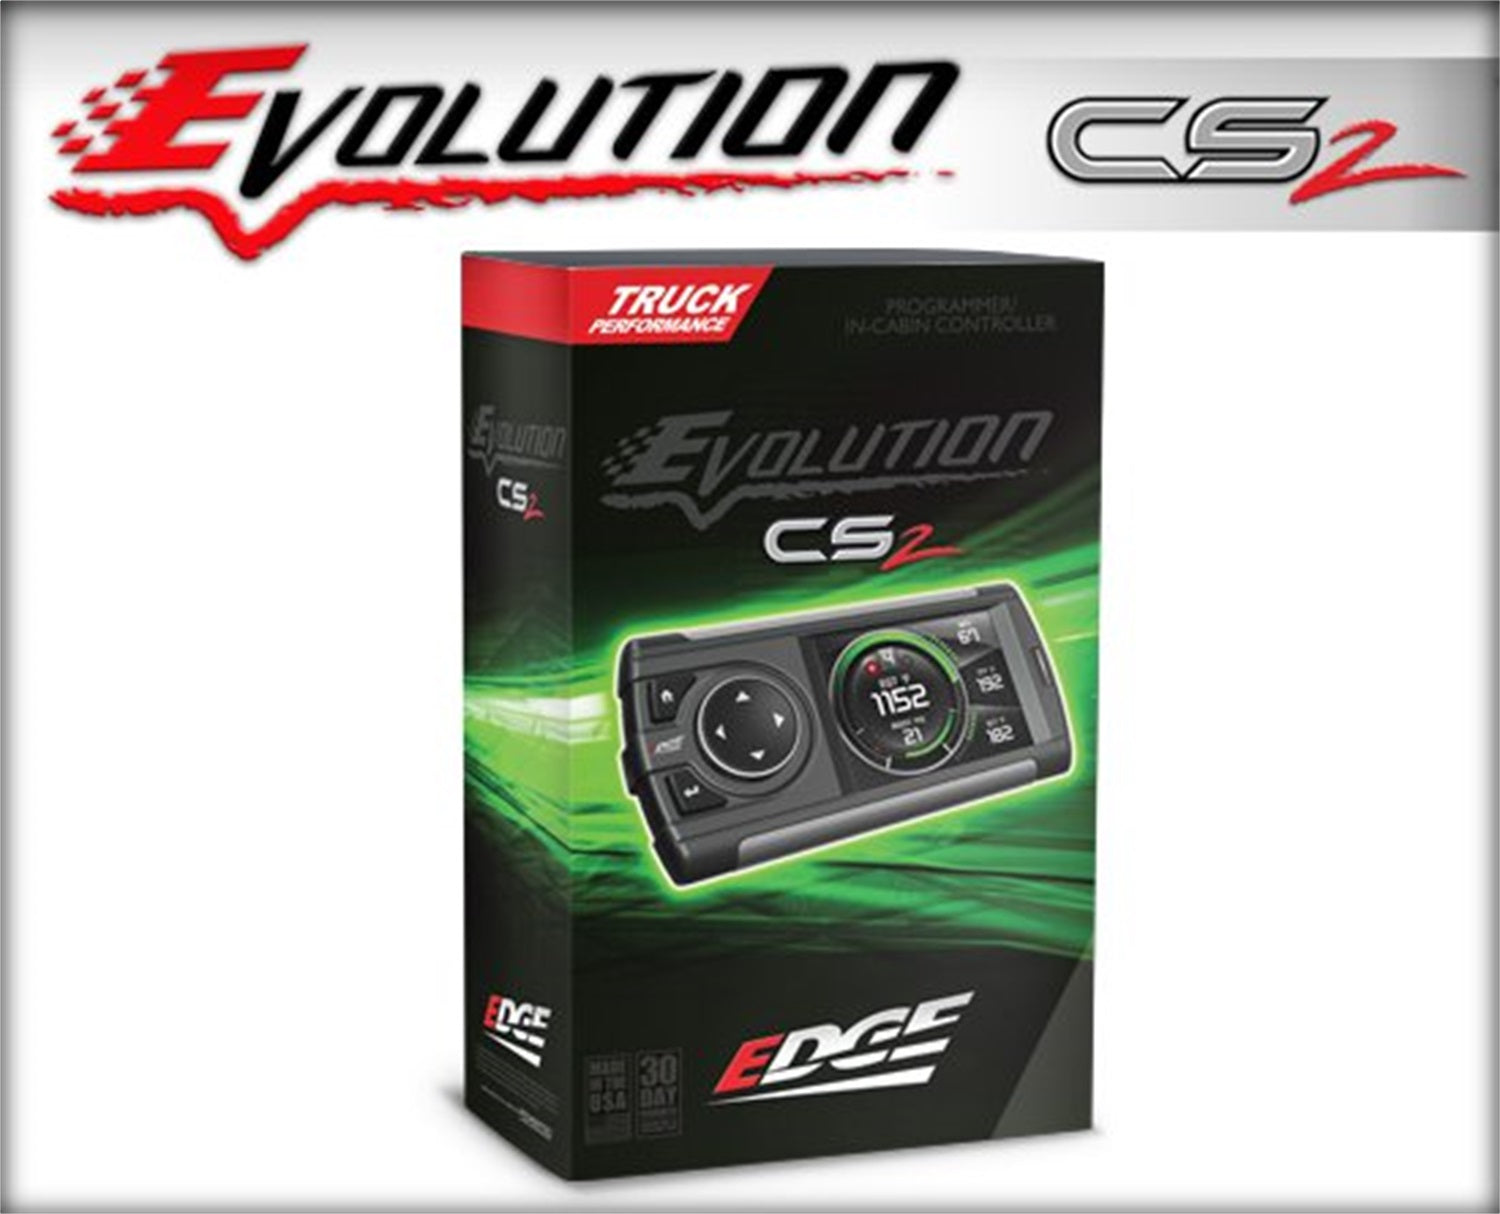 CALIFORNIA EDITION  DIESEL EVOLUTION CS2 - refer to website for coverage